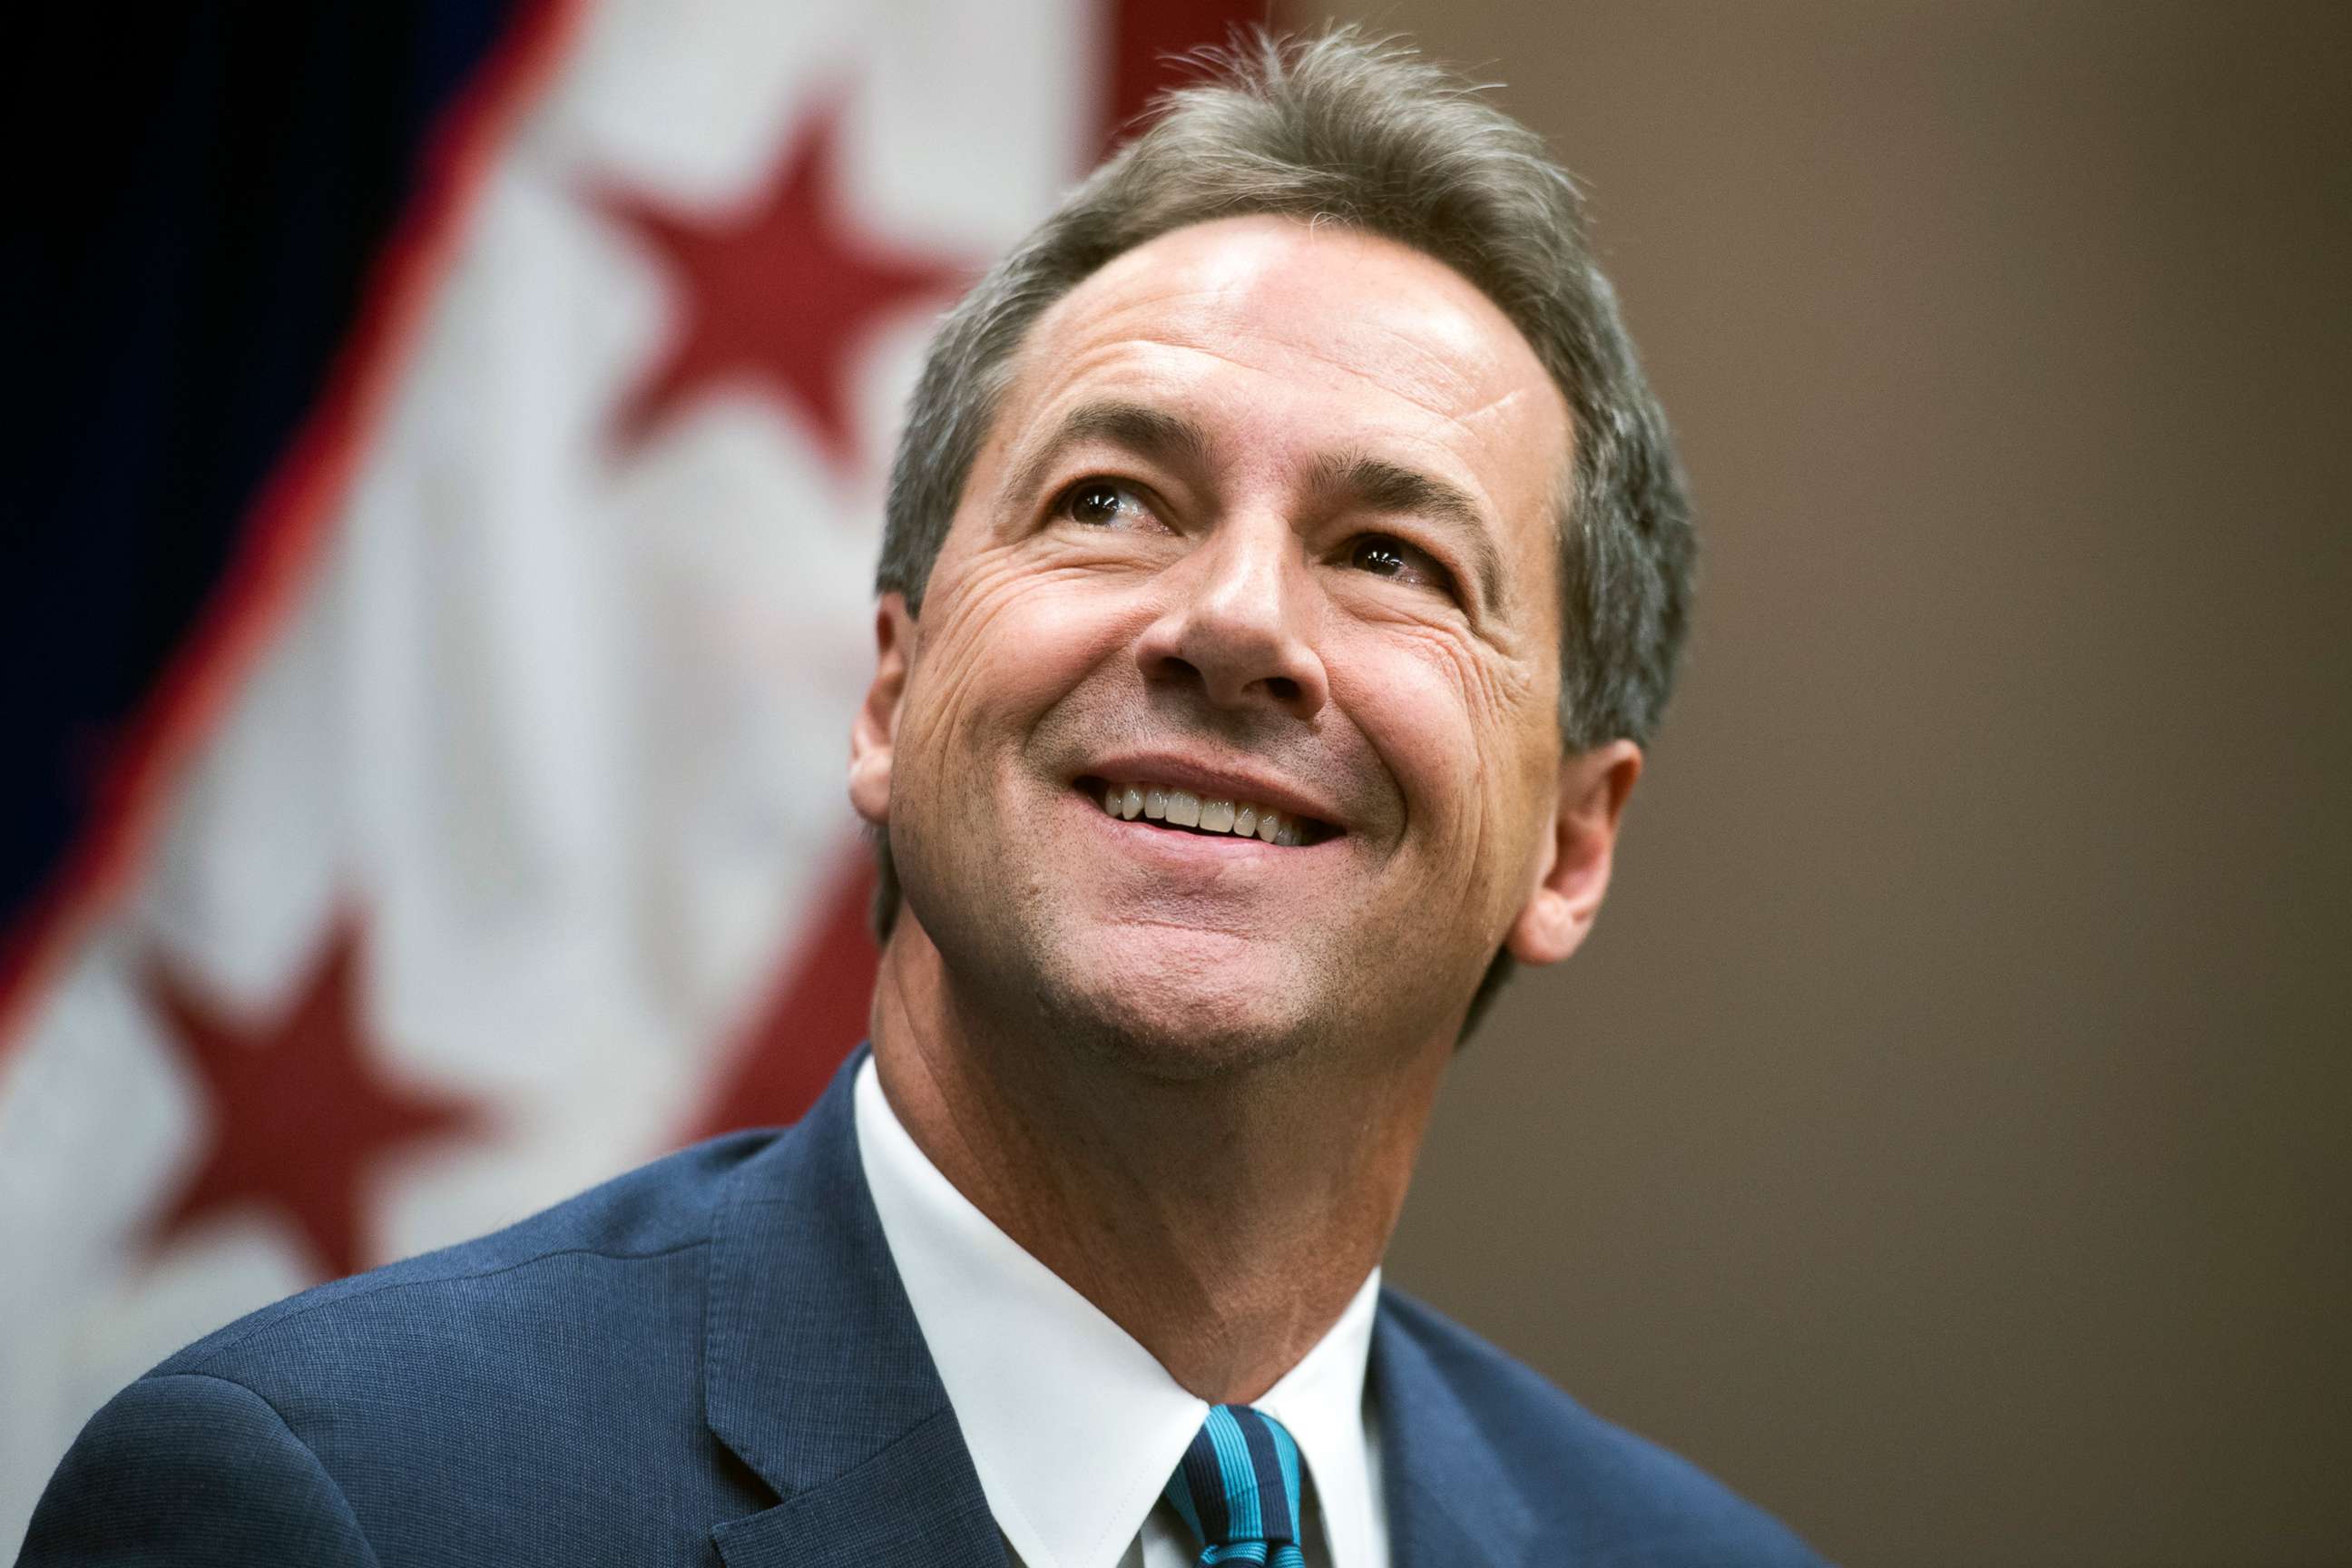 PHOTO: Montana Gov. Steve Bullock attends a town hall at the American Federation of Teachers in Washington, D.C., Sept. 19, 2019.